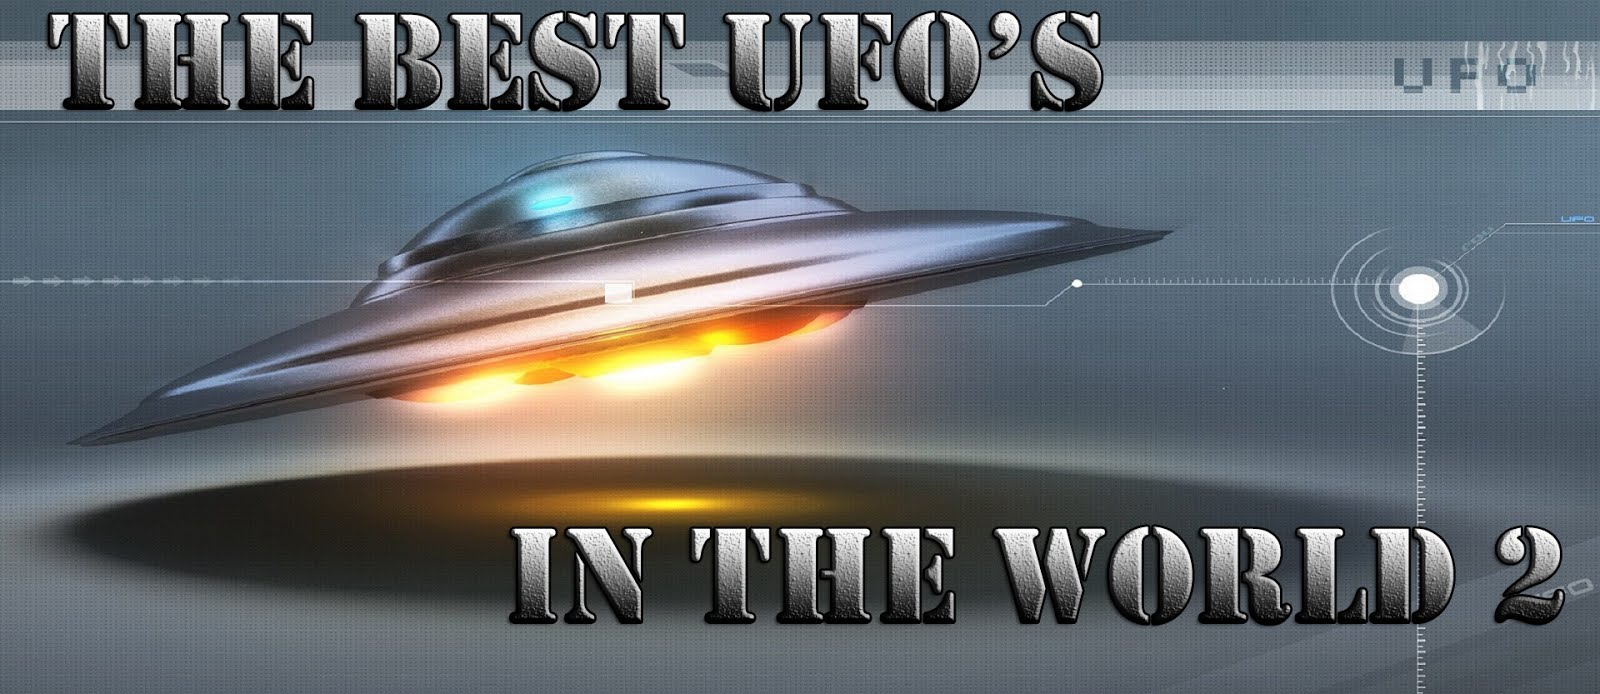 THE BEST UFO'S IN THE WORLD 2